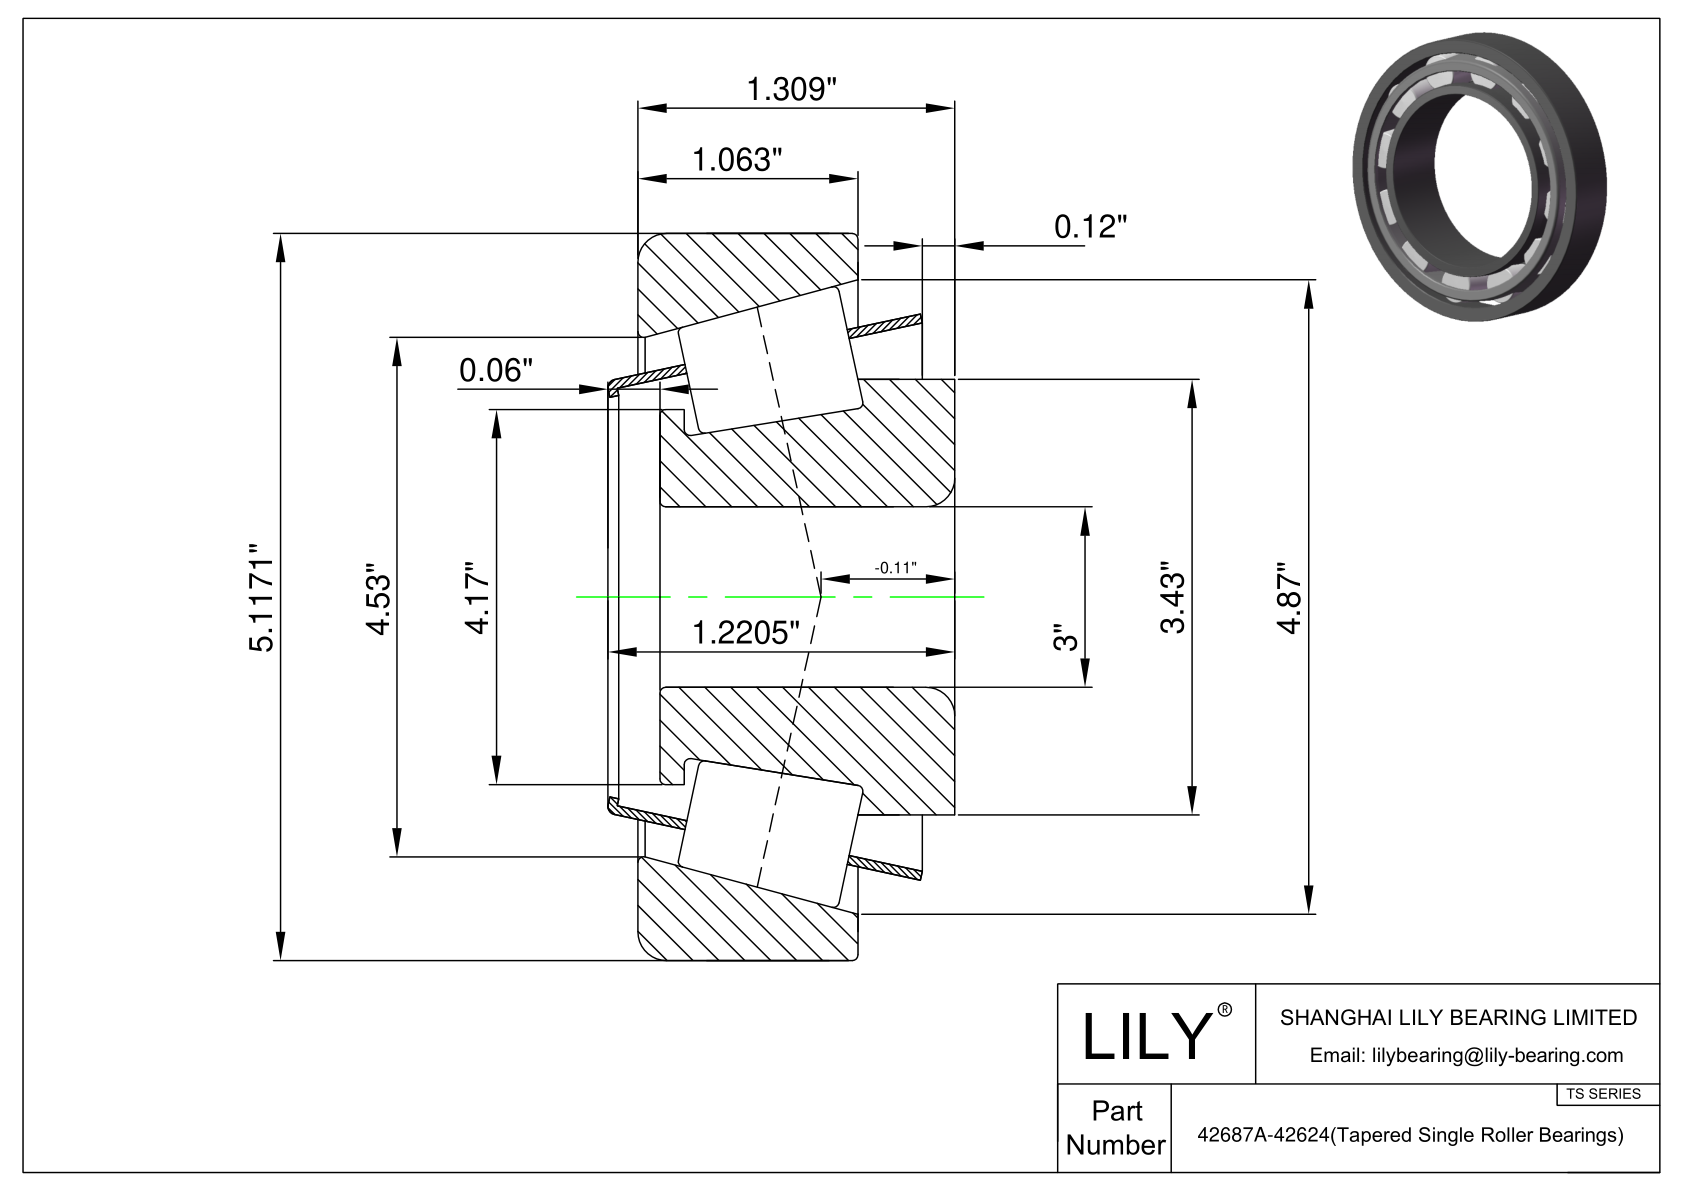 42687A-42624 TS (Tapered Single Roller Bearings) (Imperial) cad drawing